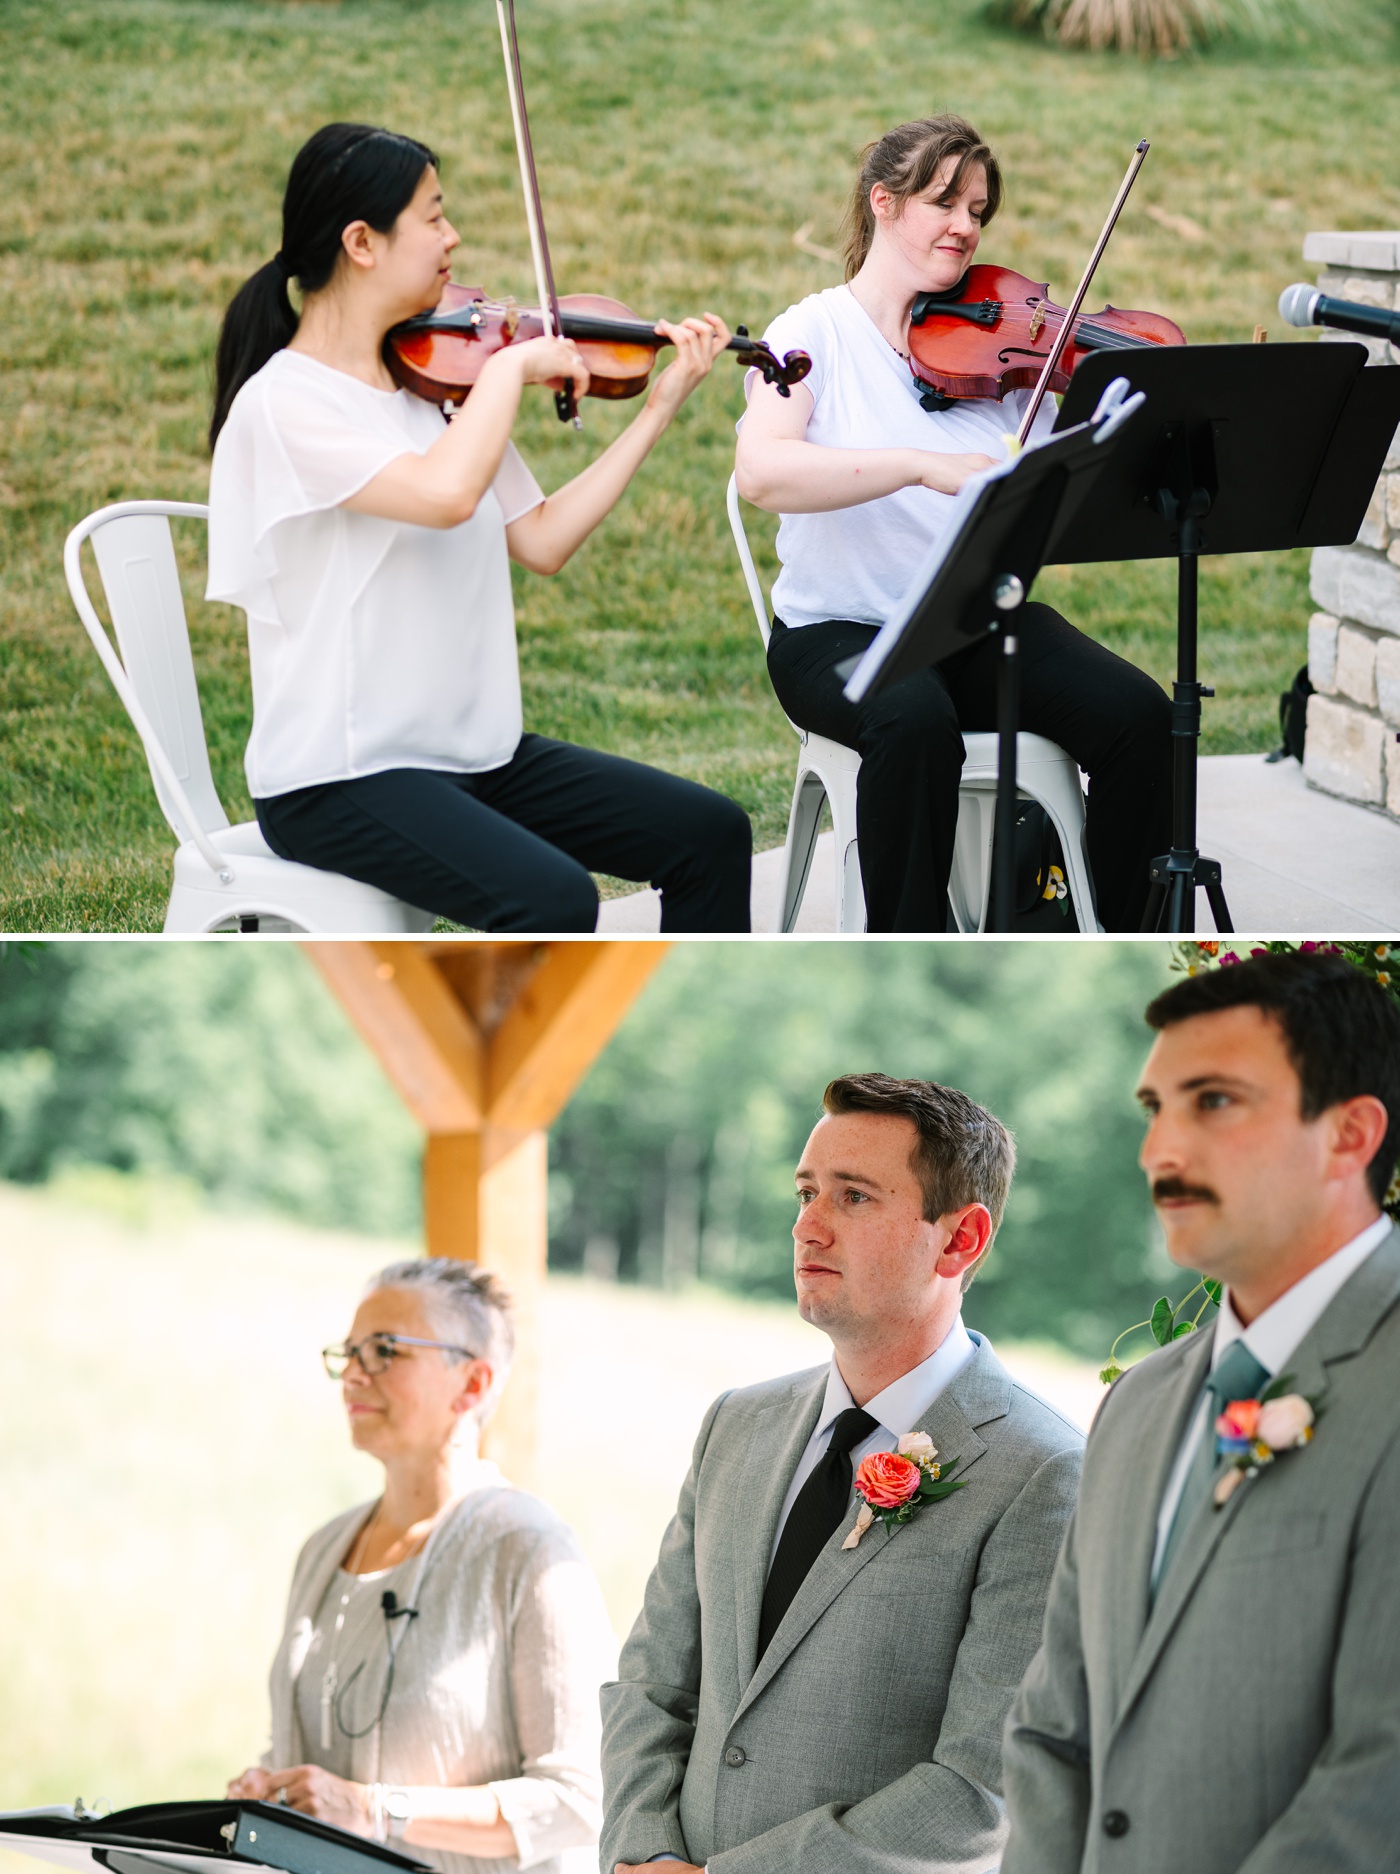 Outdoor wedding ceremony at The Wilds